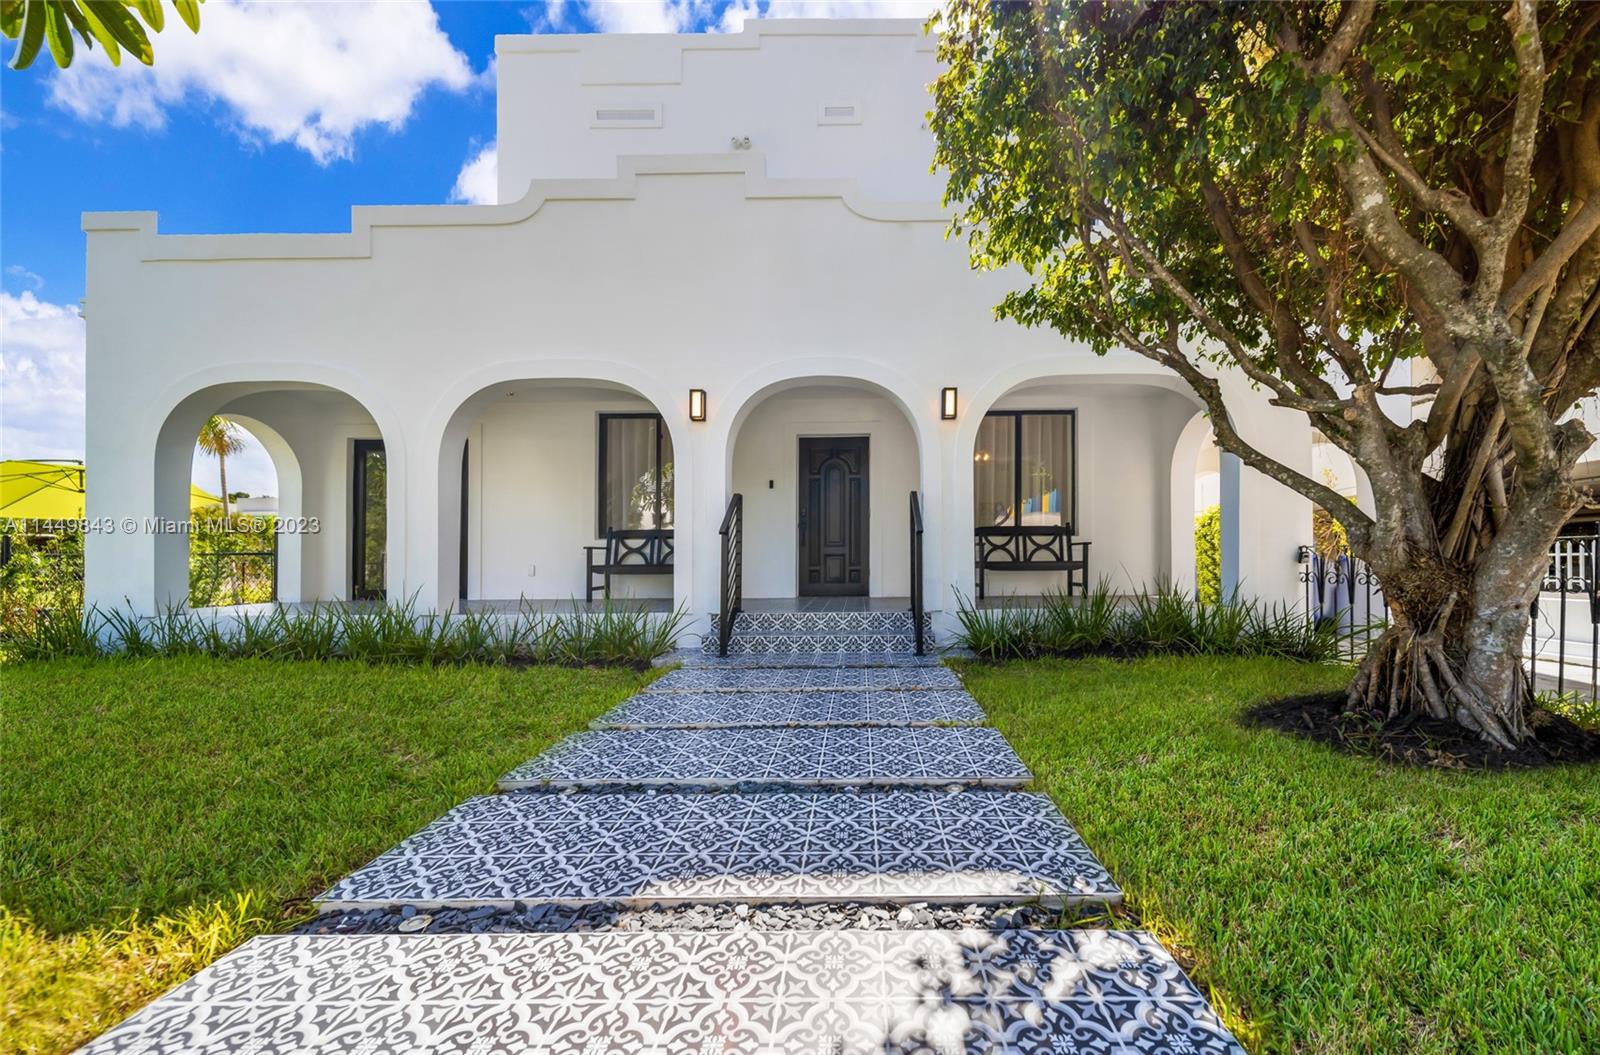 Prime Miami location! Dive into this two-story, 3,625 sq ft renovated Old Spanish main house  with 4 beds, 3 baths, two living rooms, a studio library, and ample storage space. Nestled on a 10,125 sq ft lot, its expansive patios lead to a secluded infinity pool. There's also a 1 bed, 1 bath apartment (guest quarter) with storage. Located in the esteemed Roads Section with views of Brickell neighborhood, this home beautifully combines historical charm and modern amenities. Now seeking its discerning new owner.